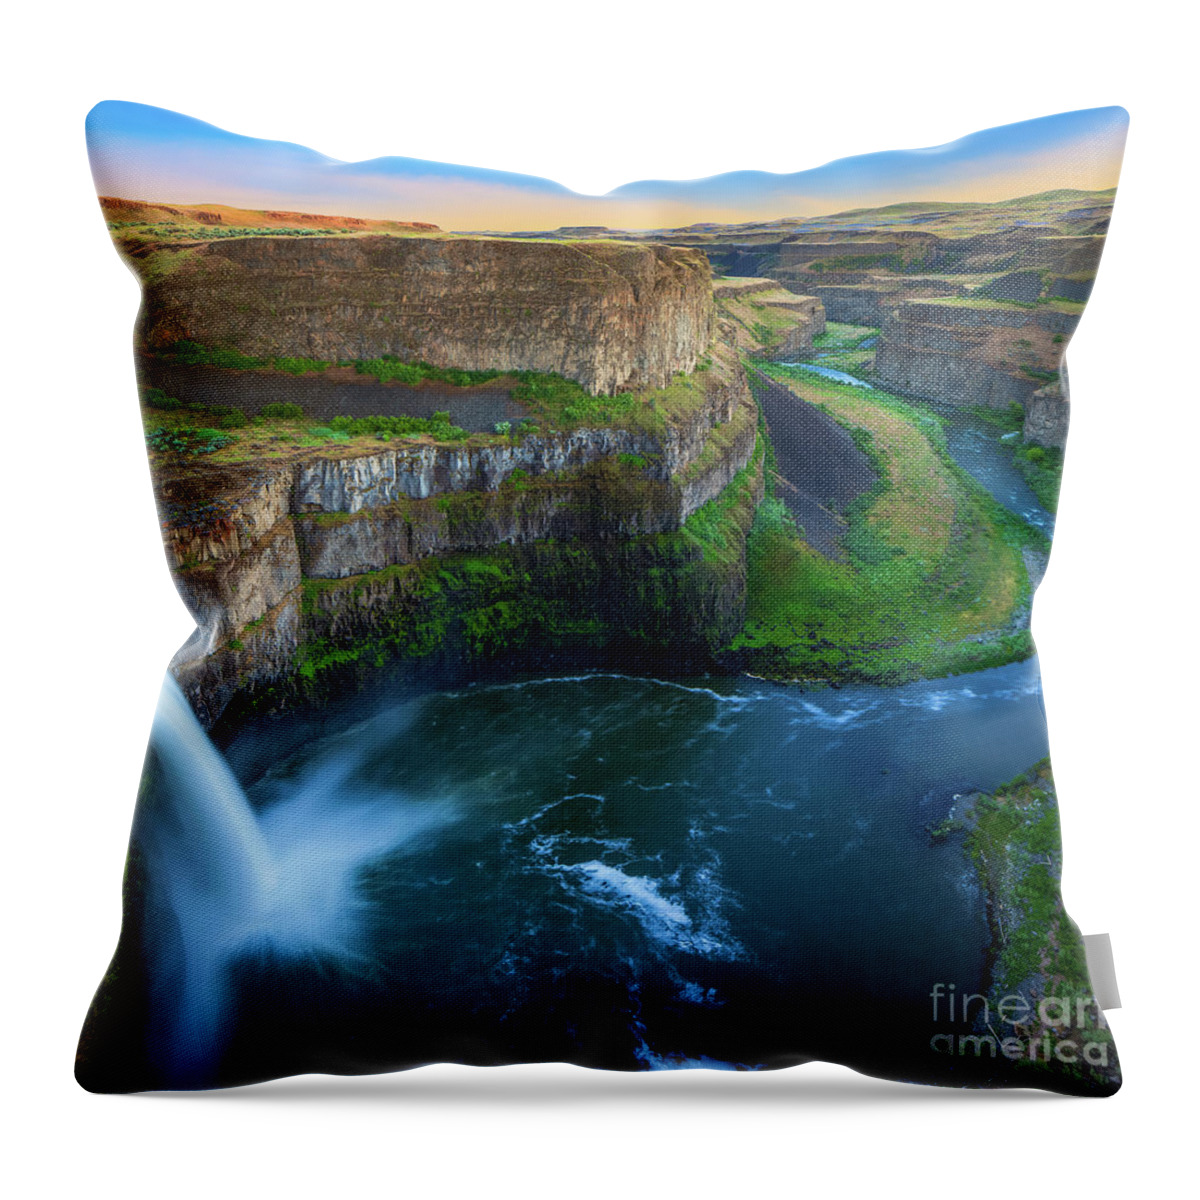 America Throw Pillow featuring the photograph Palouse Falls Pool by Inge Johnsson